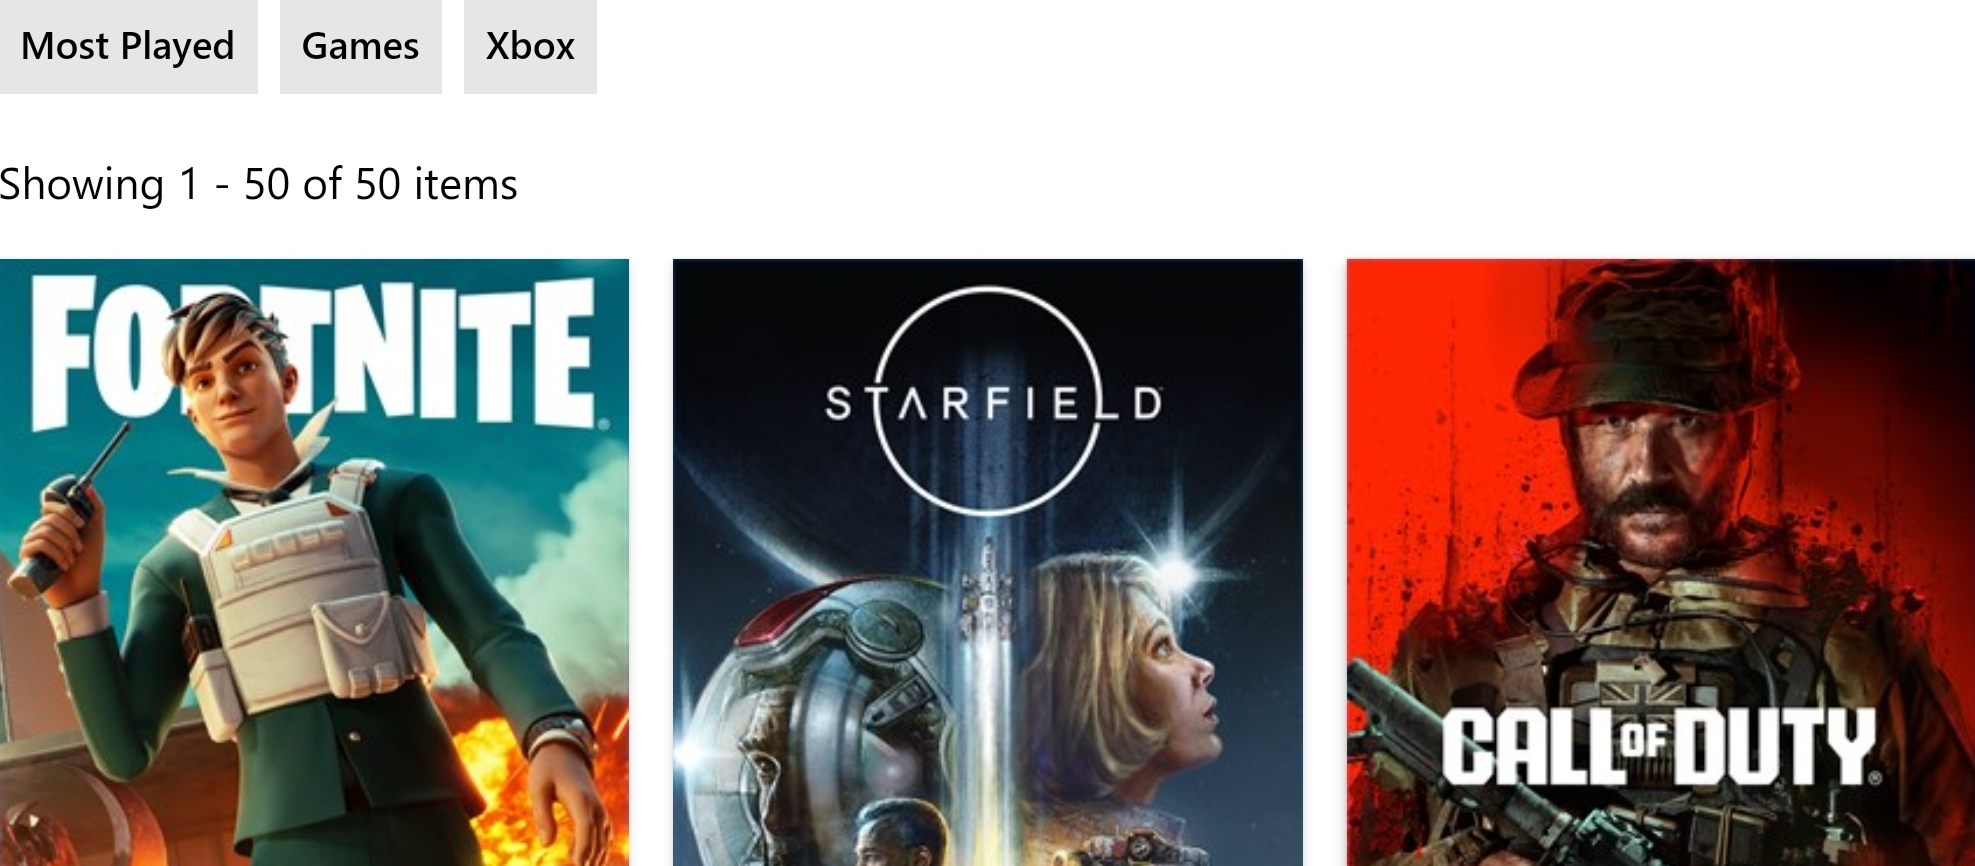 Starfield's Metacritic score continues to drop as it nearly slides out of  2023's top 50 games